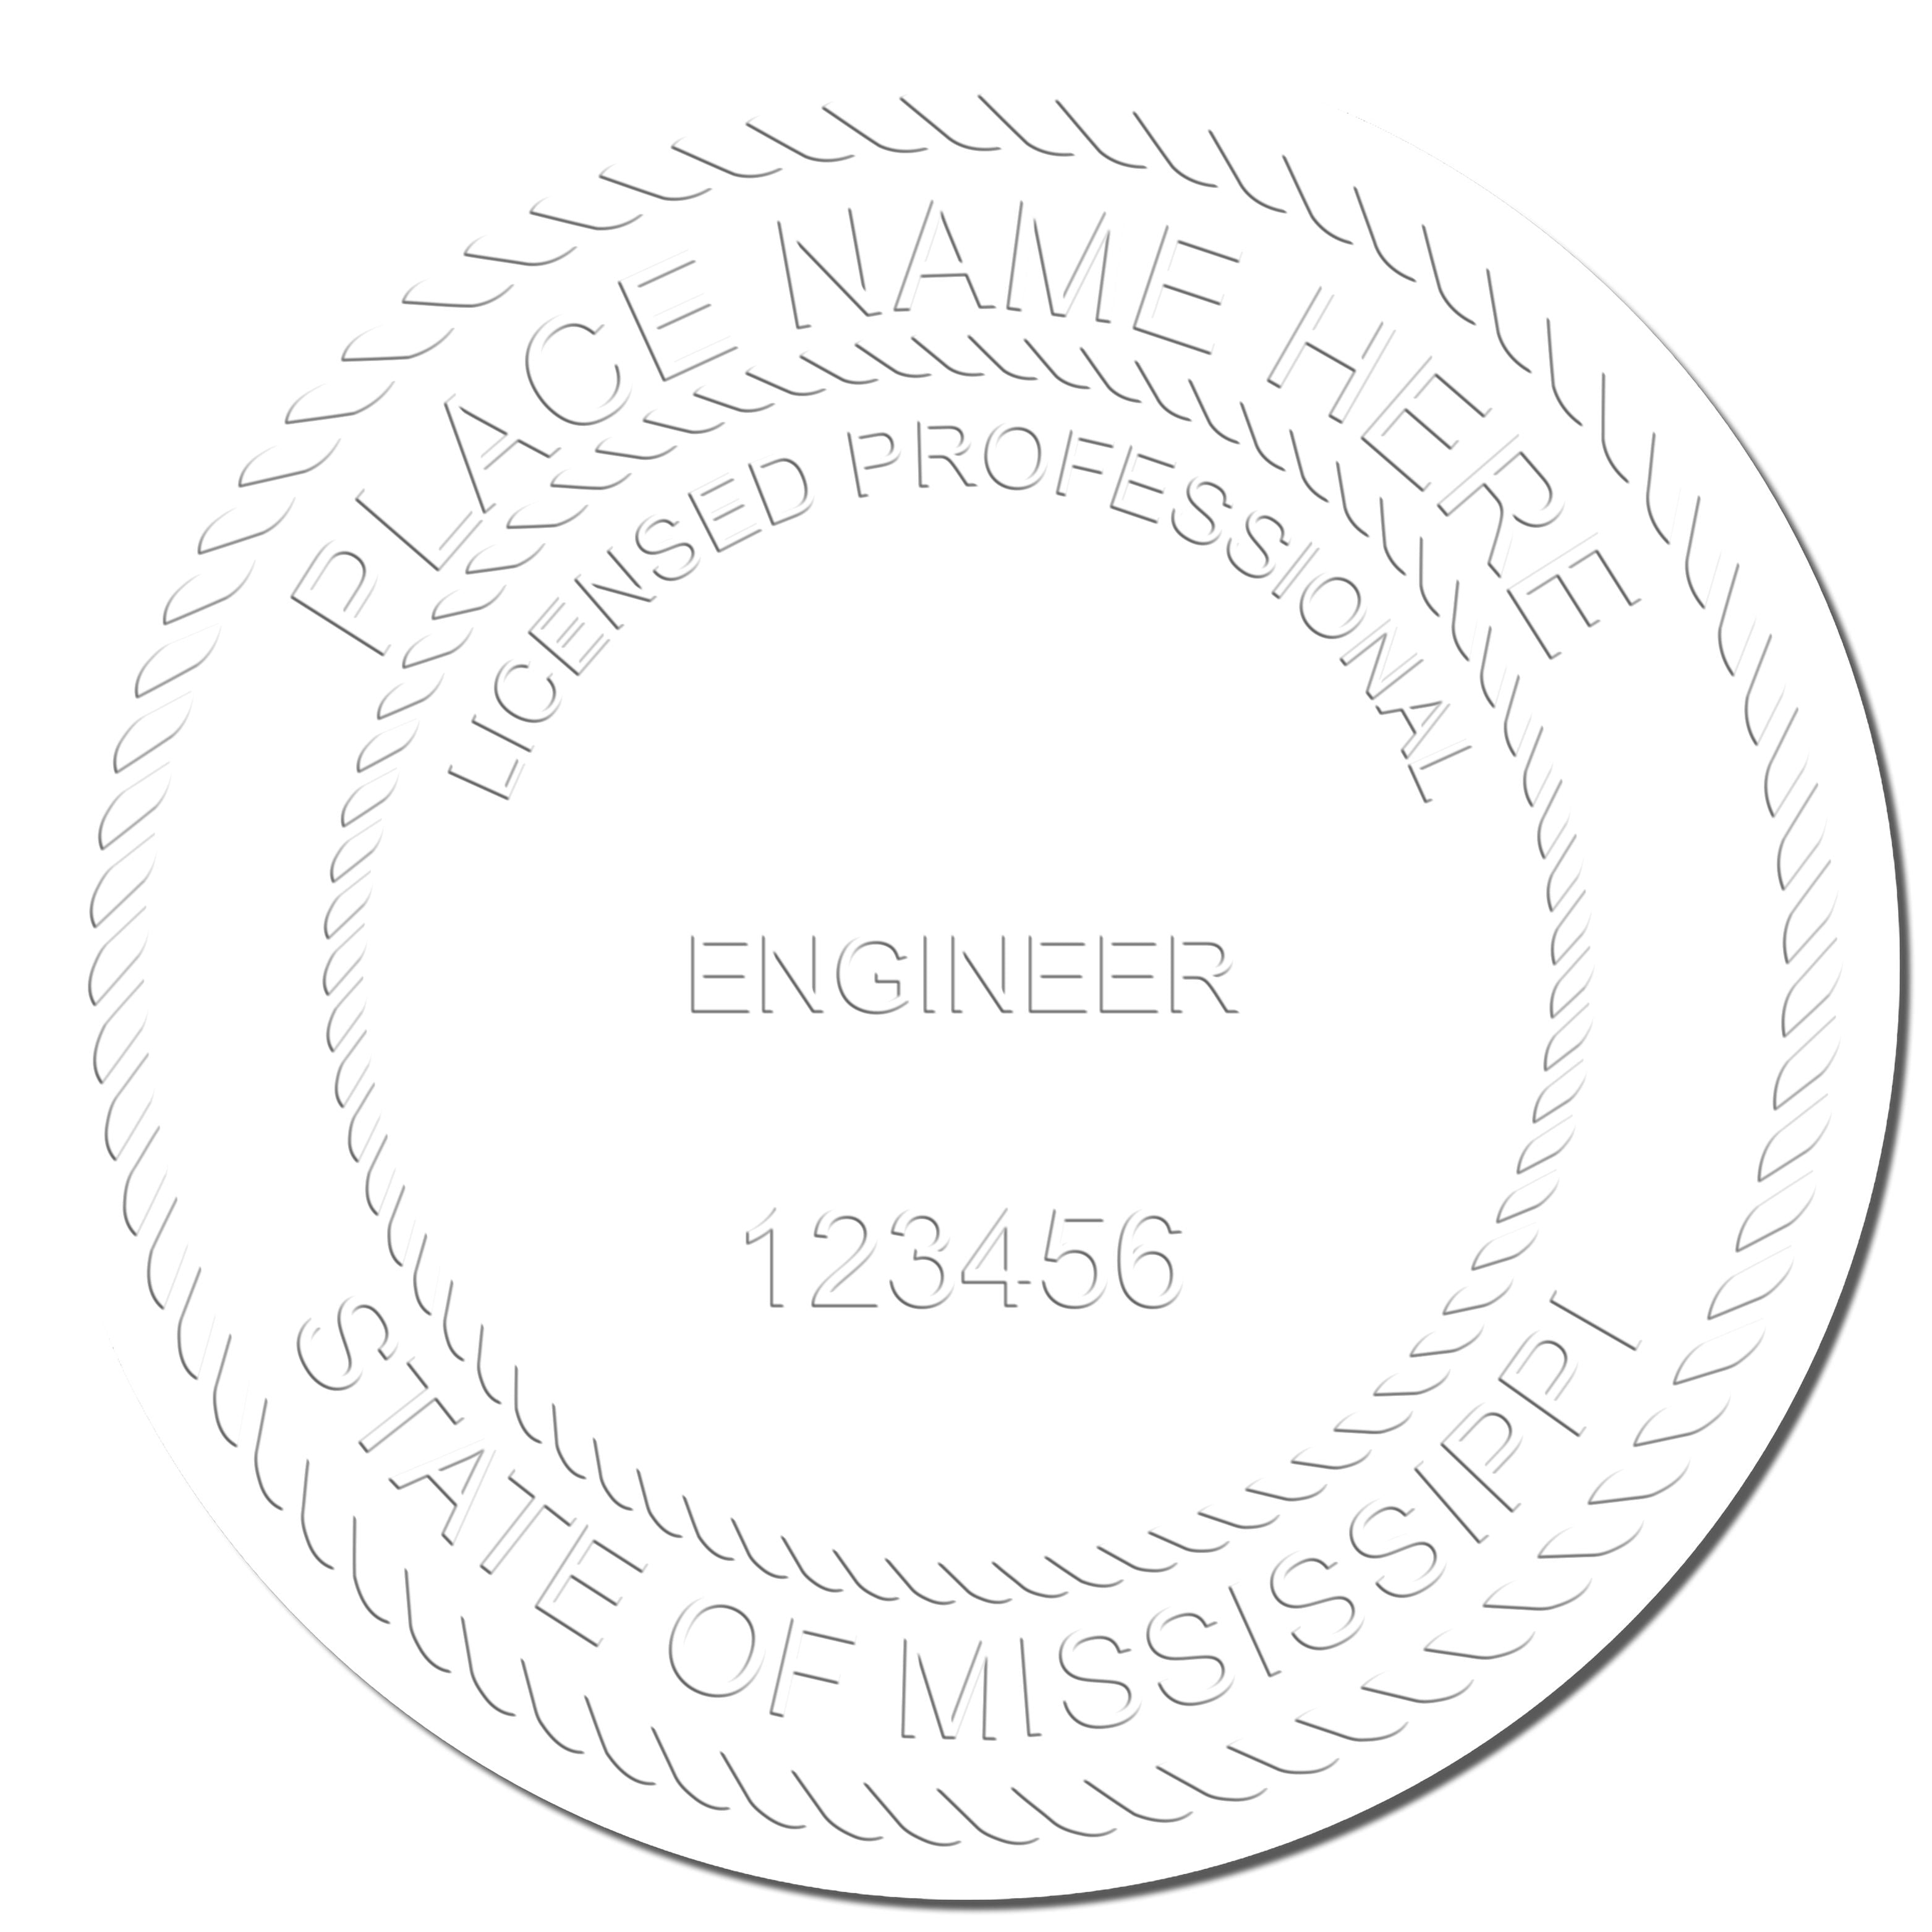 This paper is stamped with a sample imprint of the Hybrid Mississippi Engineer Seal, signifying its quality and reliability.